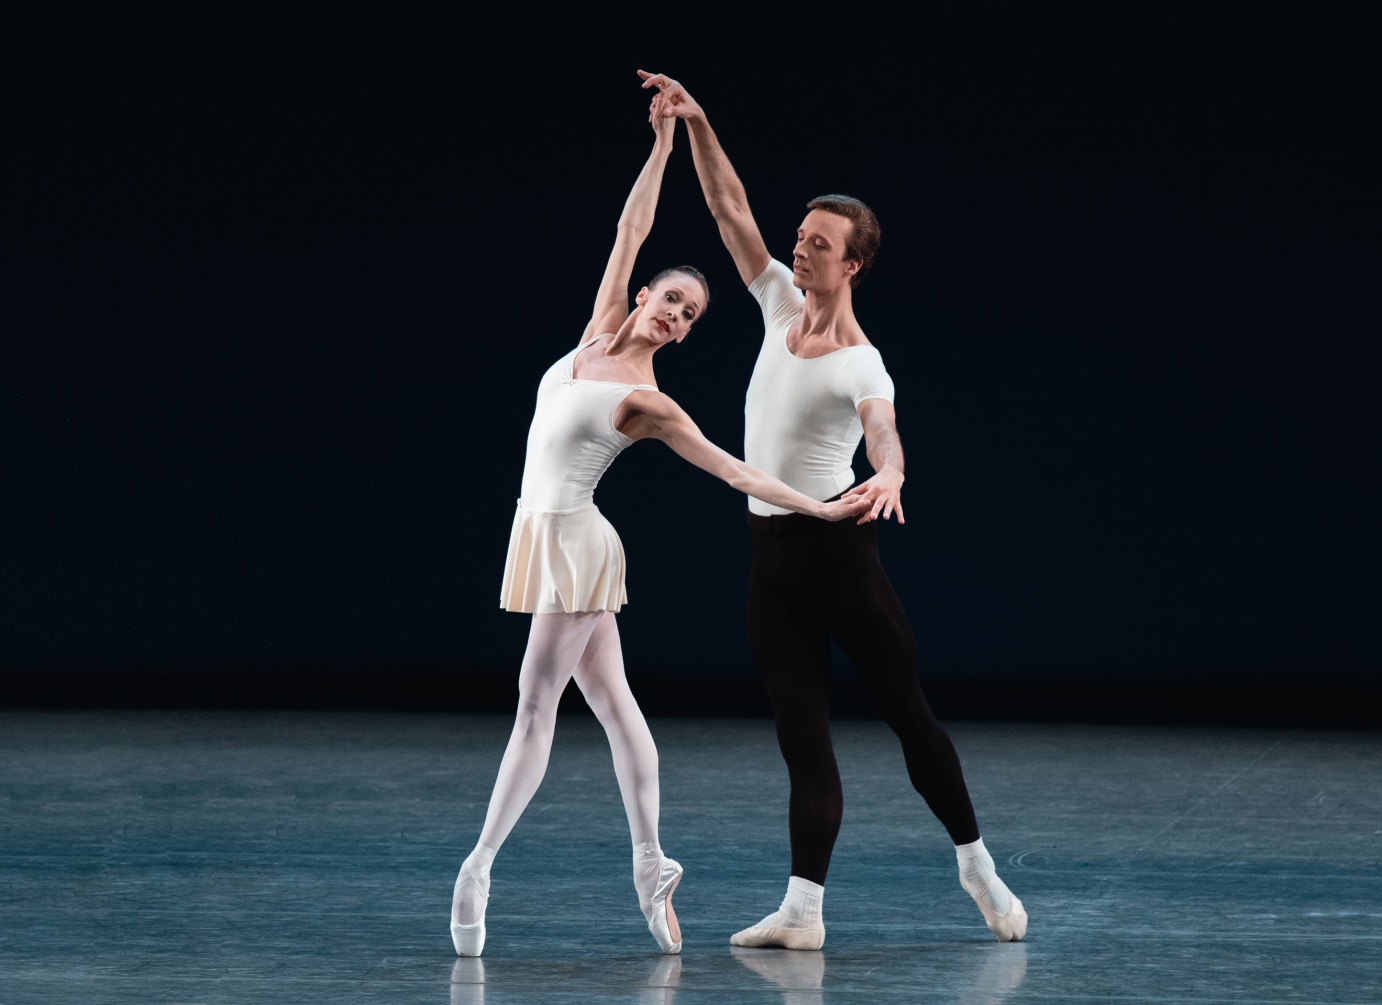 Ask la Cour partners Maria Kowroski. Wearing ballet class outfits, he stands with one leg behind him in tendu and she is in fourth position en pointe.